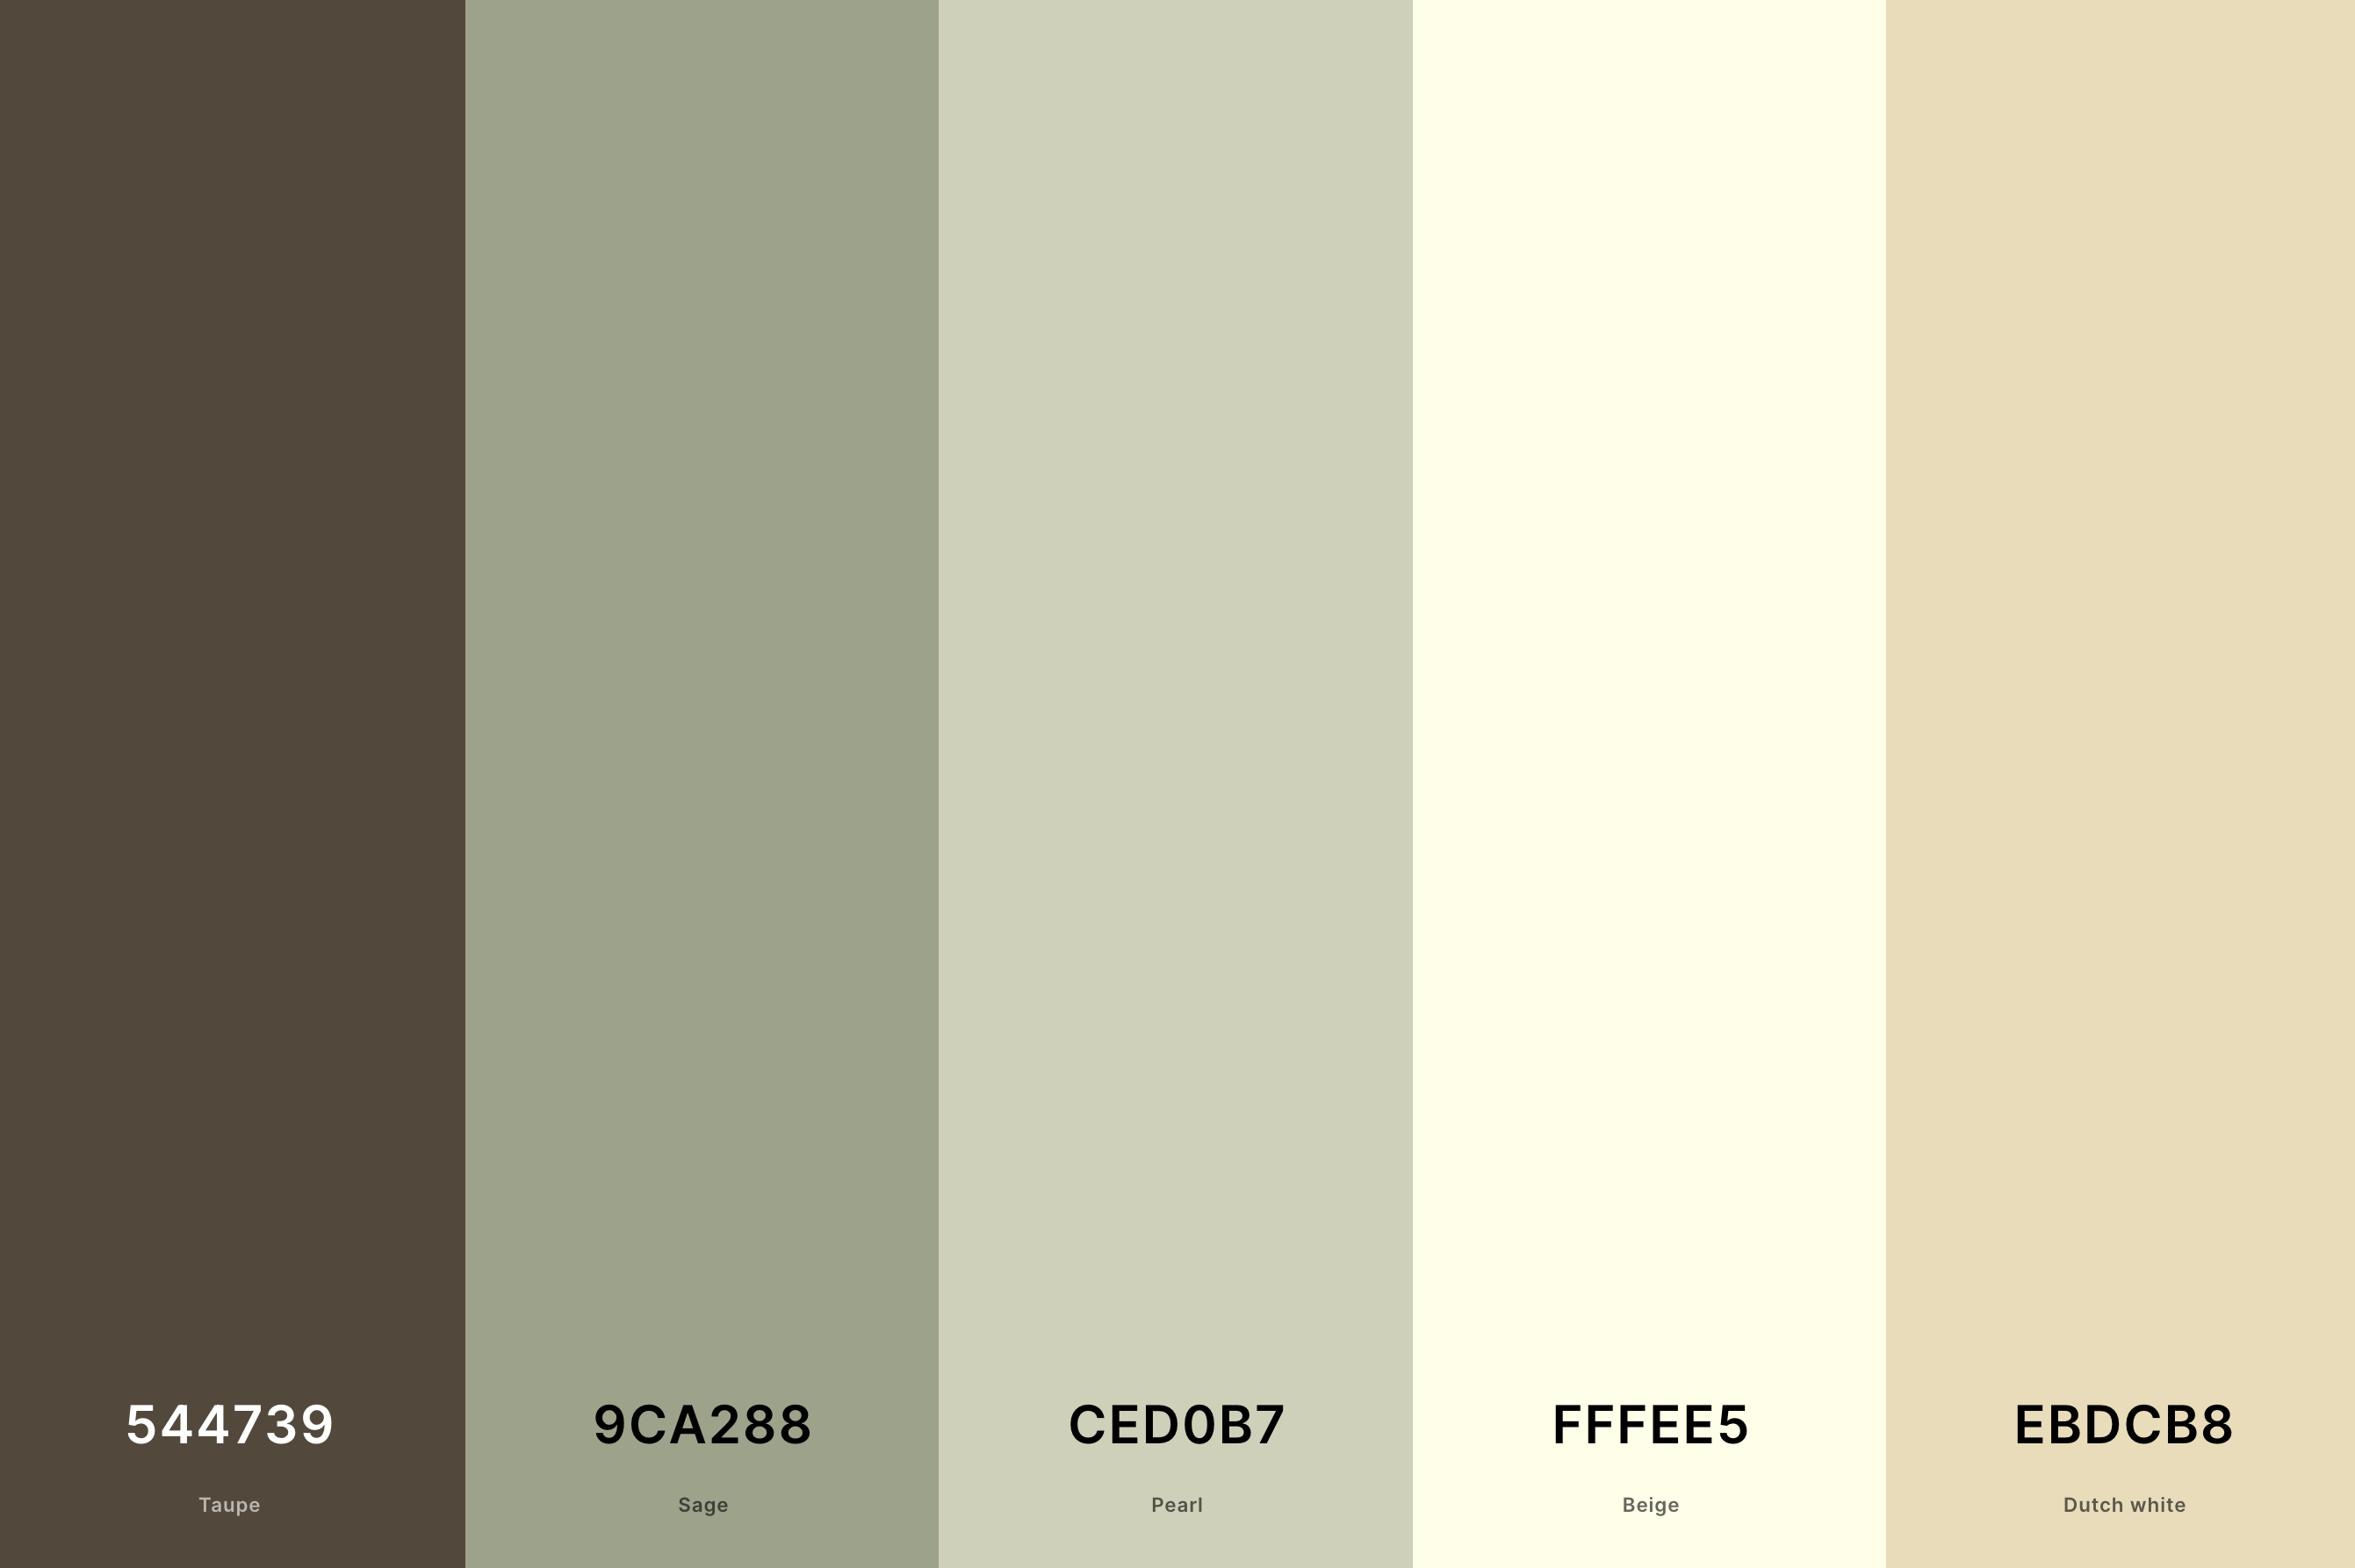 7. Sage Green And Cream Color Palette Color Palette with Taupe (Hex #544739) + Sage (Hex #9CA288) + Pearl (Hex #CED0B7) + Beige (Hex #FFFEE5) + Dutch White (Hex #EBDCB8) Color Palette with Hex Codes